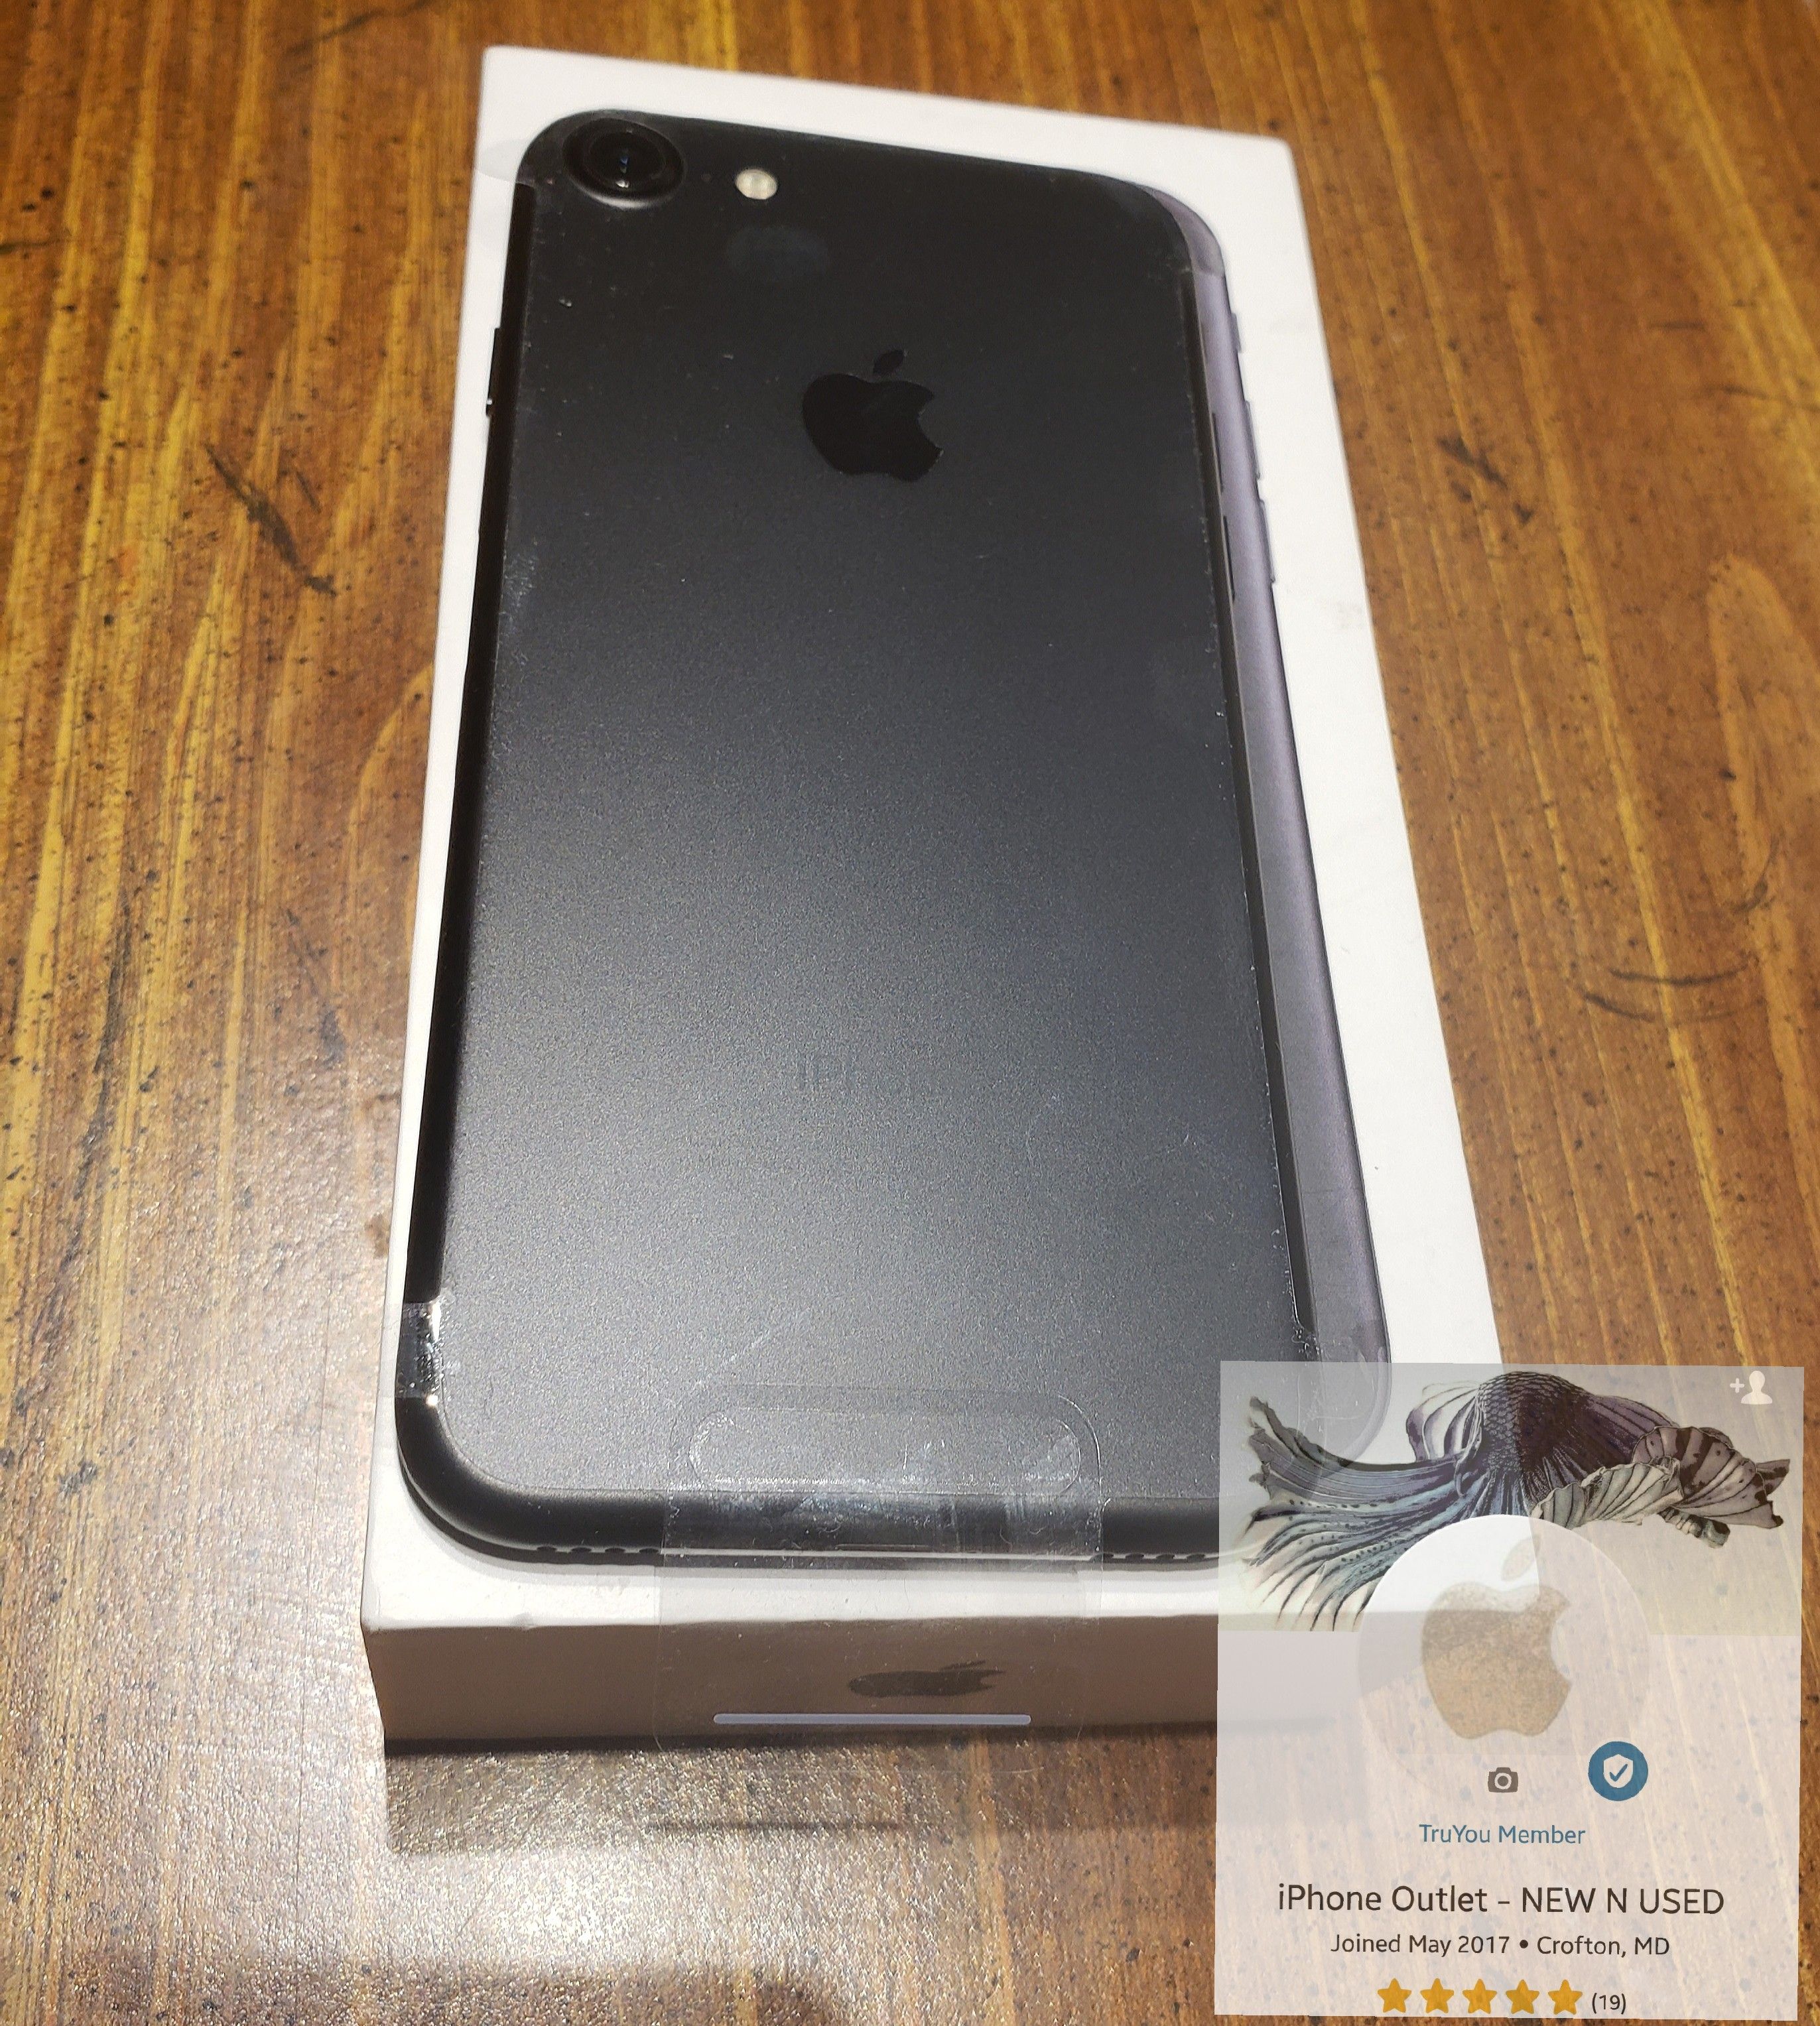 💯NEW❗ iPhone 7 〰️ 128gb❗ New Never Used 〰️ Factory Unlocked - Great way to save 💲 on a Christmas Gift ☃️